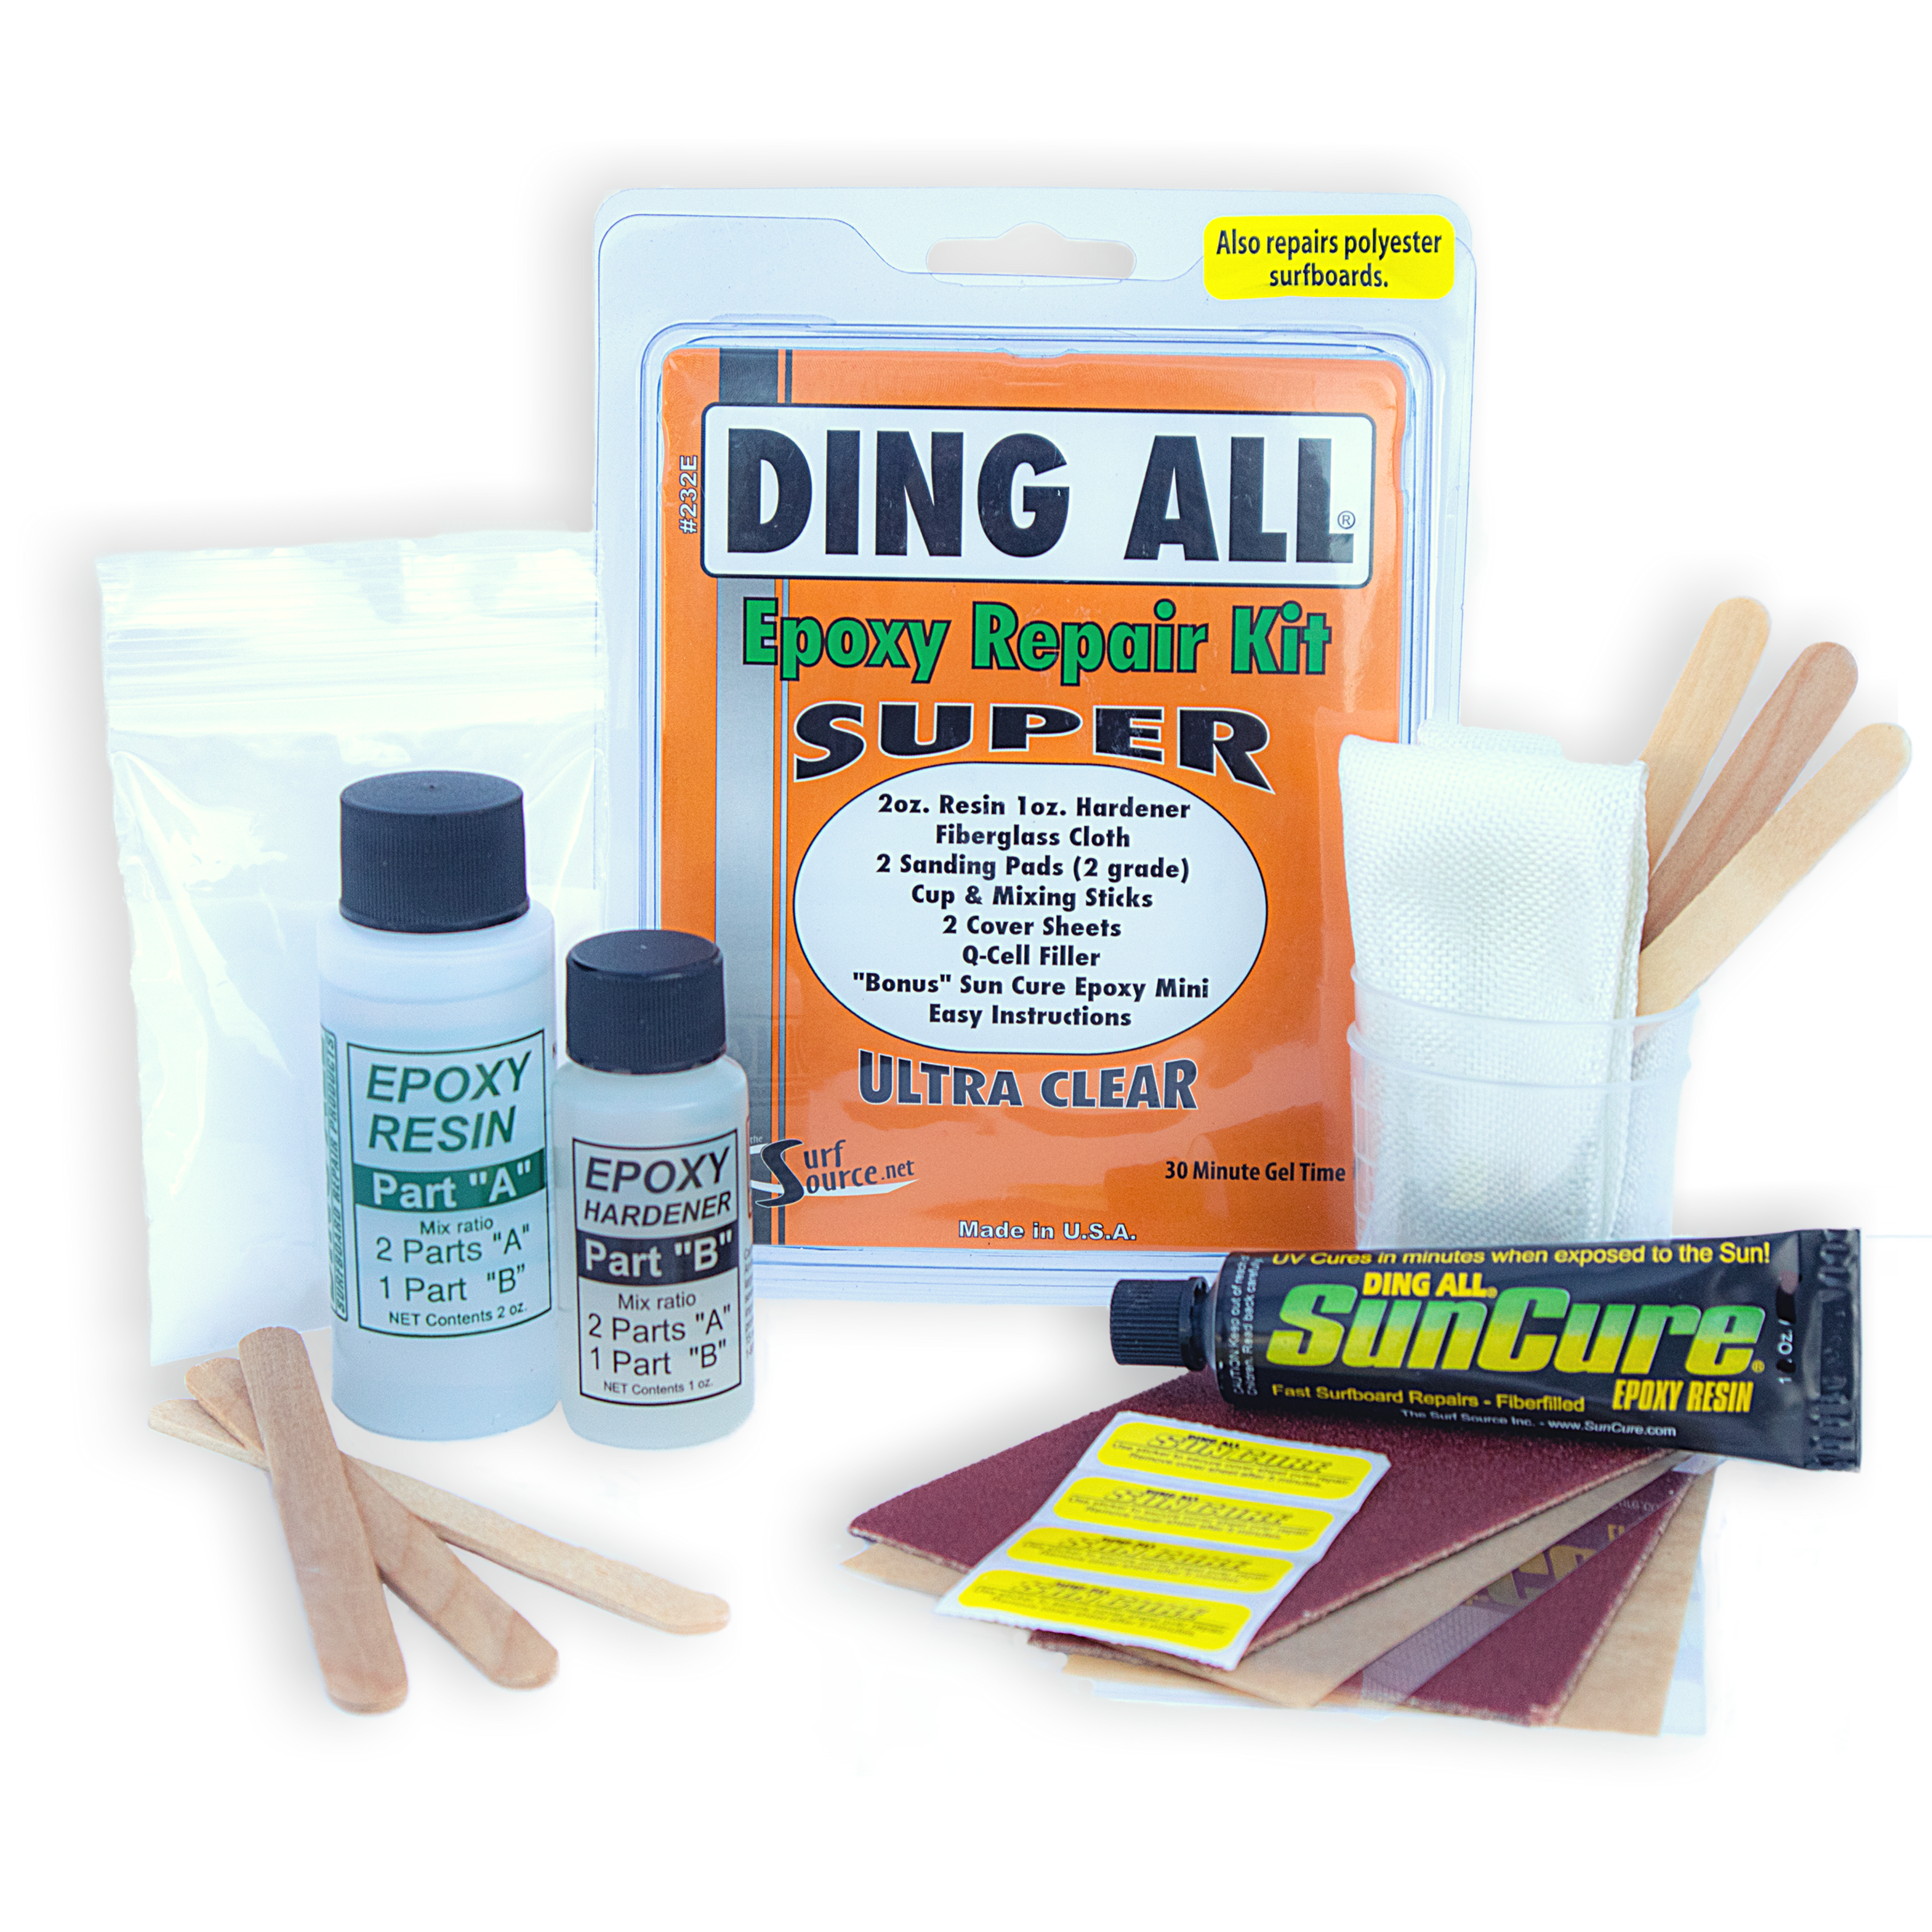 SUPER Epoxy Resin Ding Repair Kit - 3oz. (84 ml) – Ding All & SunCure